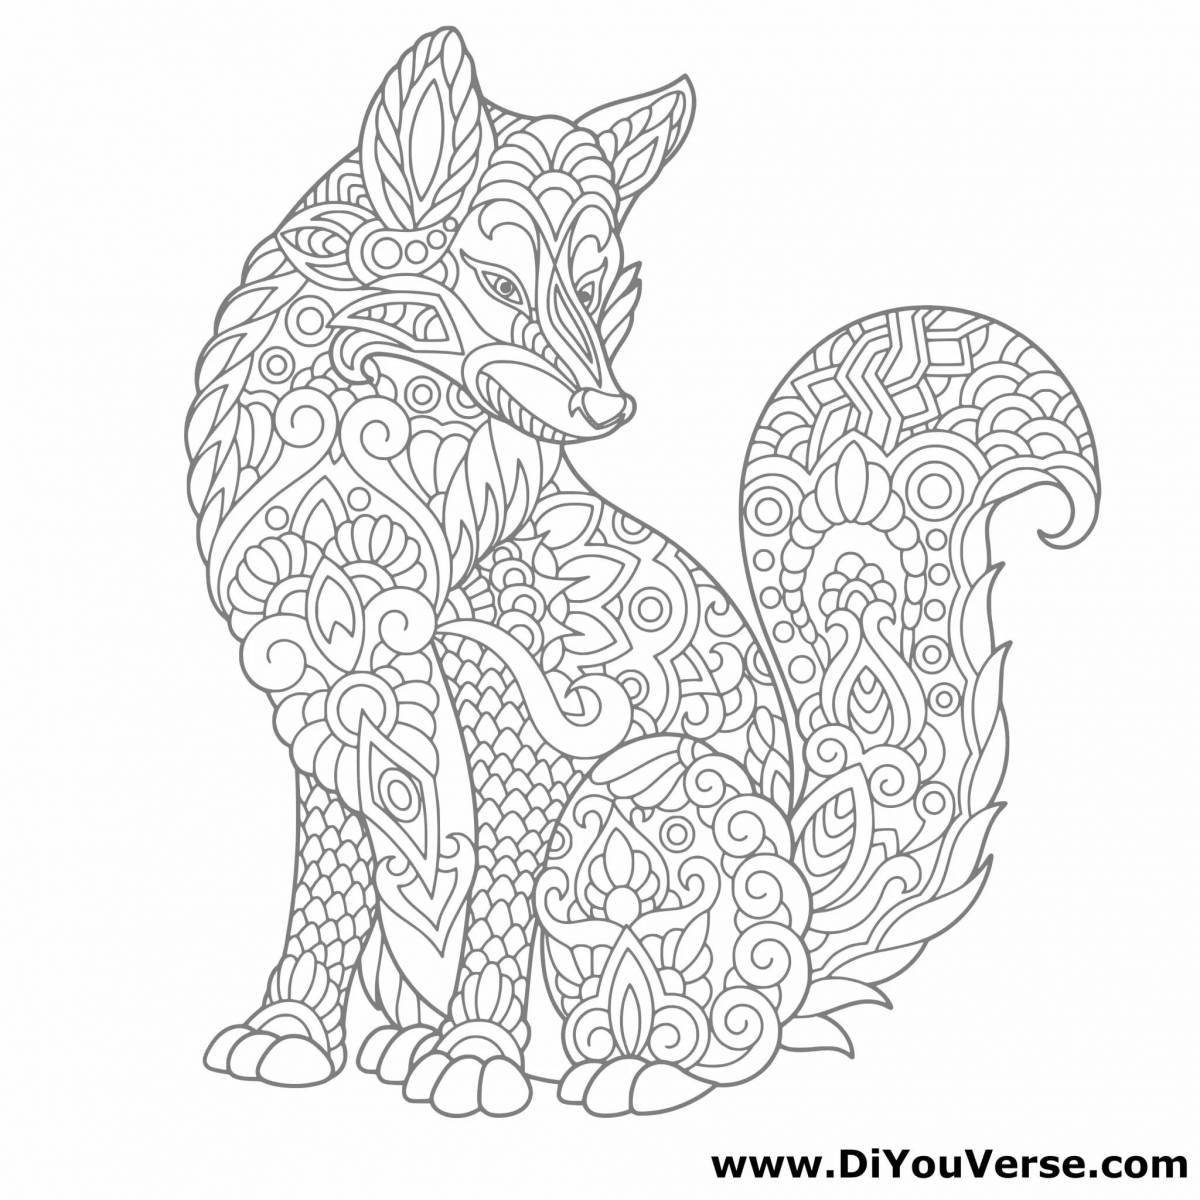 Coloring page striking red foxes